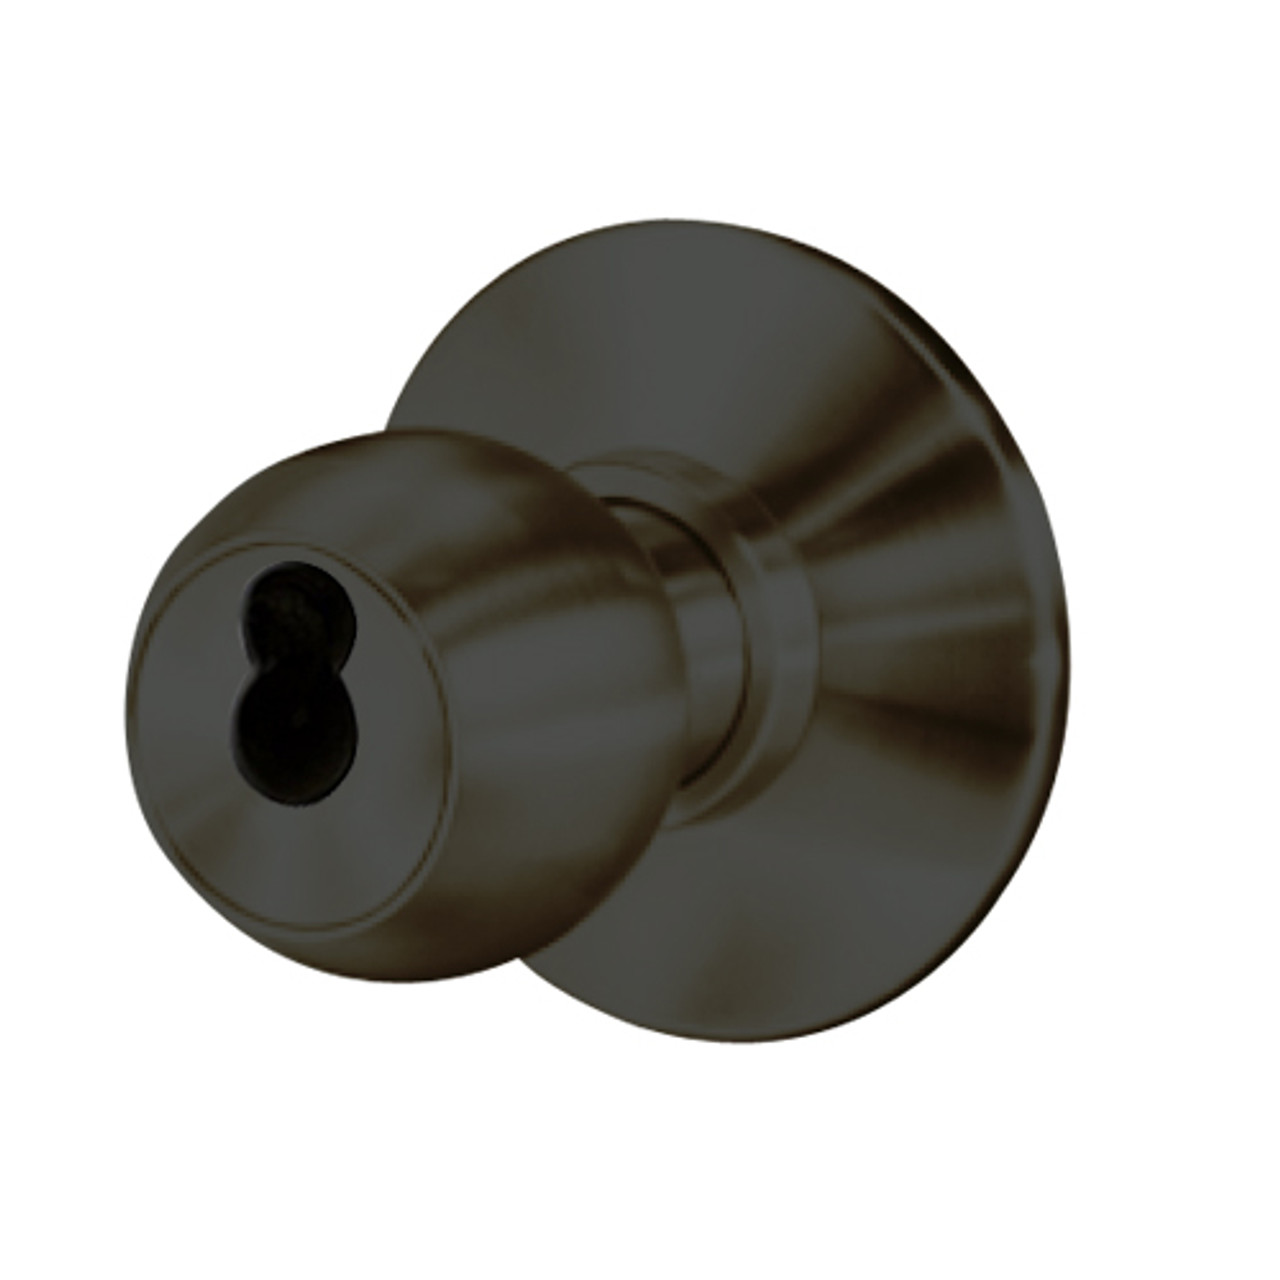 8K37XR4DSTK613 Best 8K Series Special Heavy Duty Cylindrical Knob Locks with Round Style in Oil Rubbed Bronze